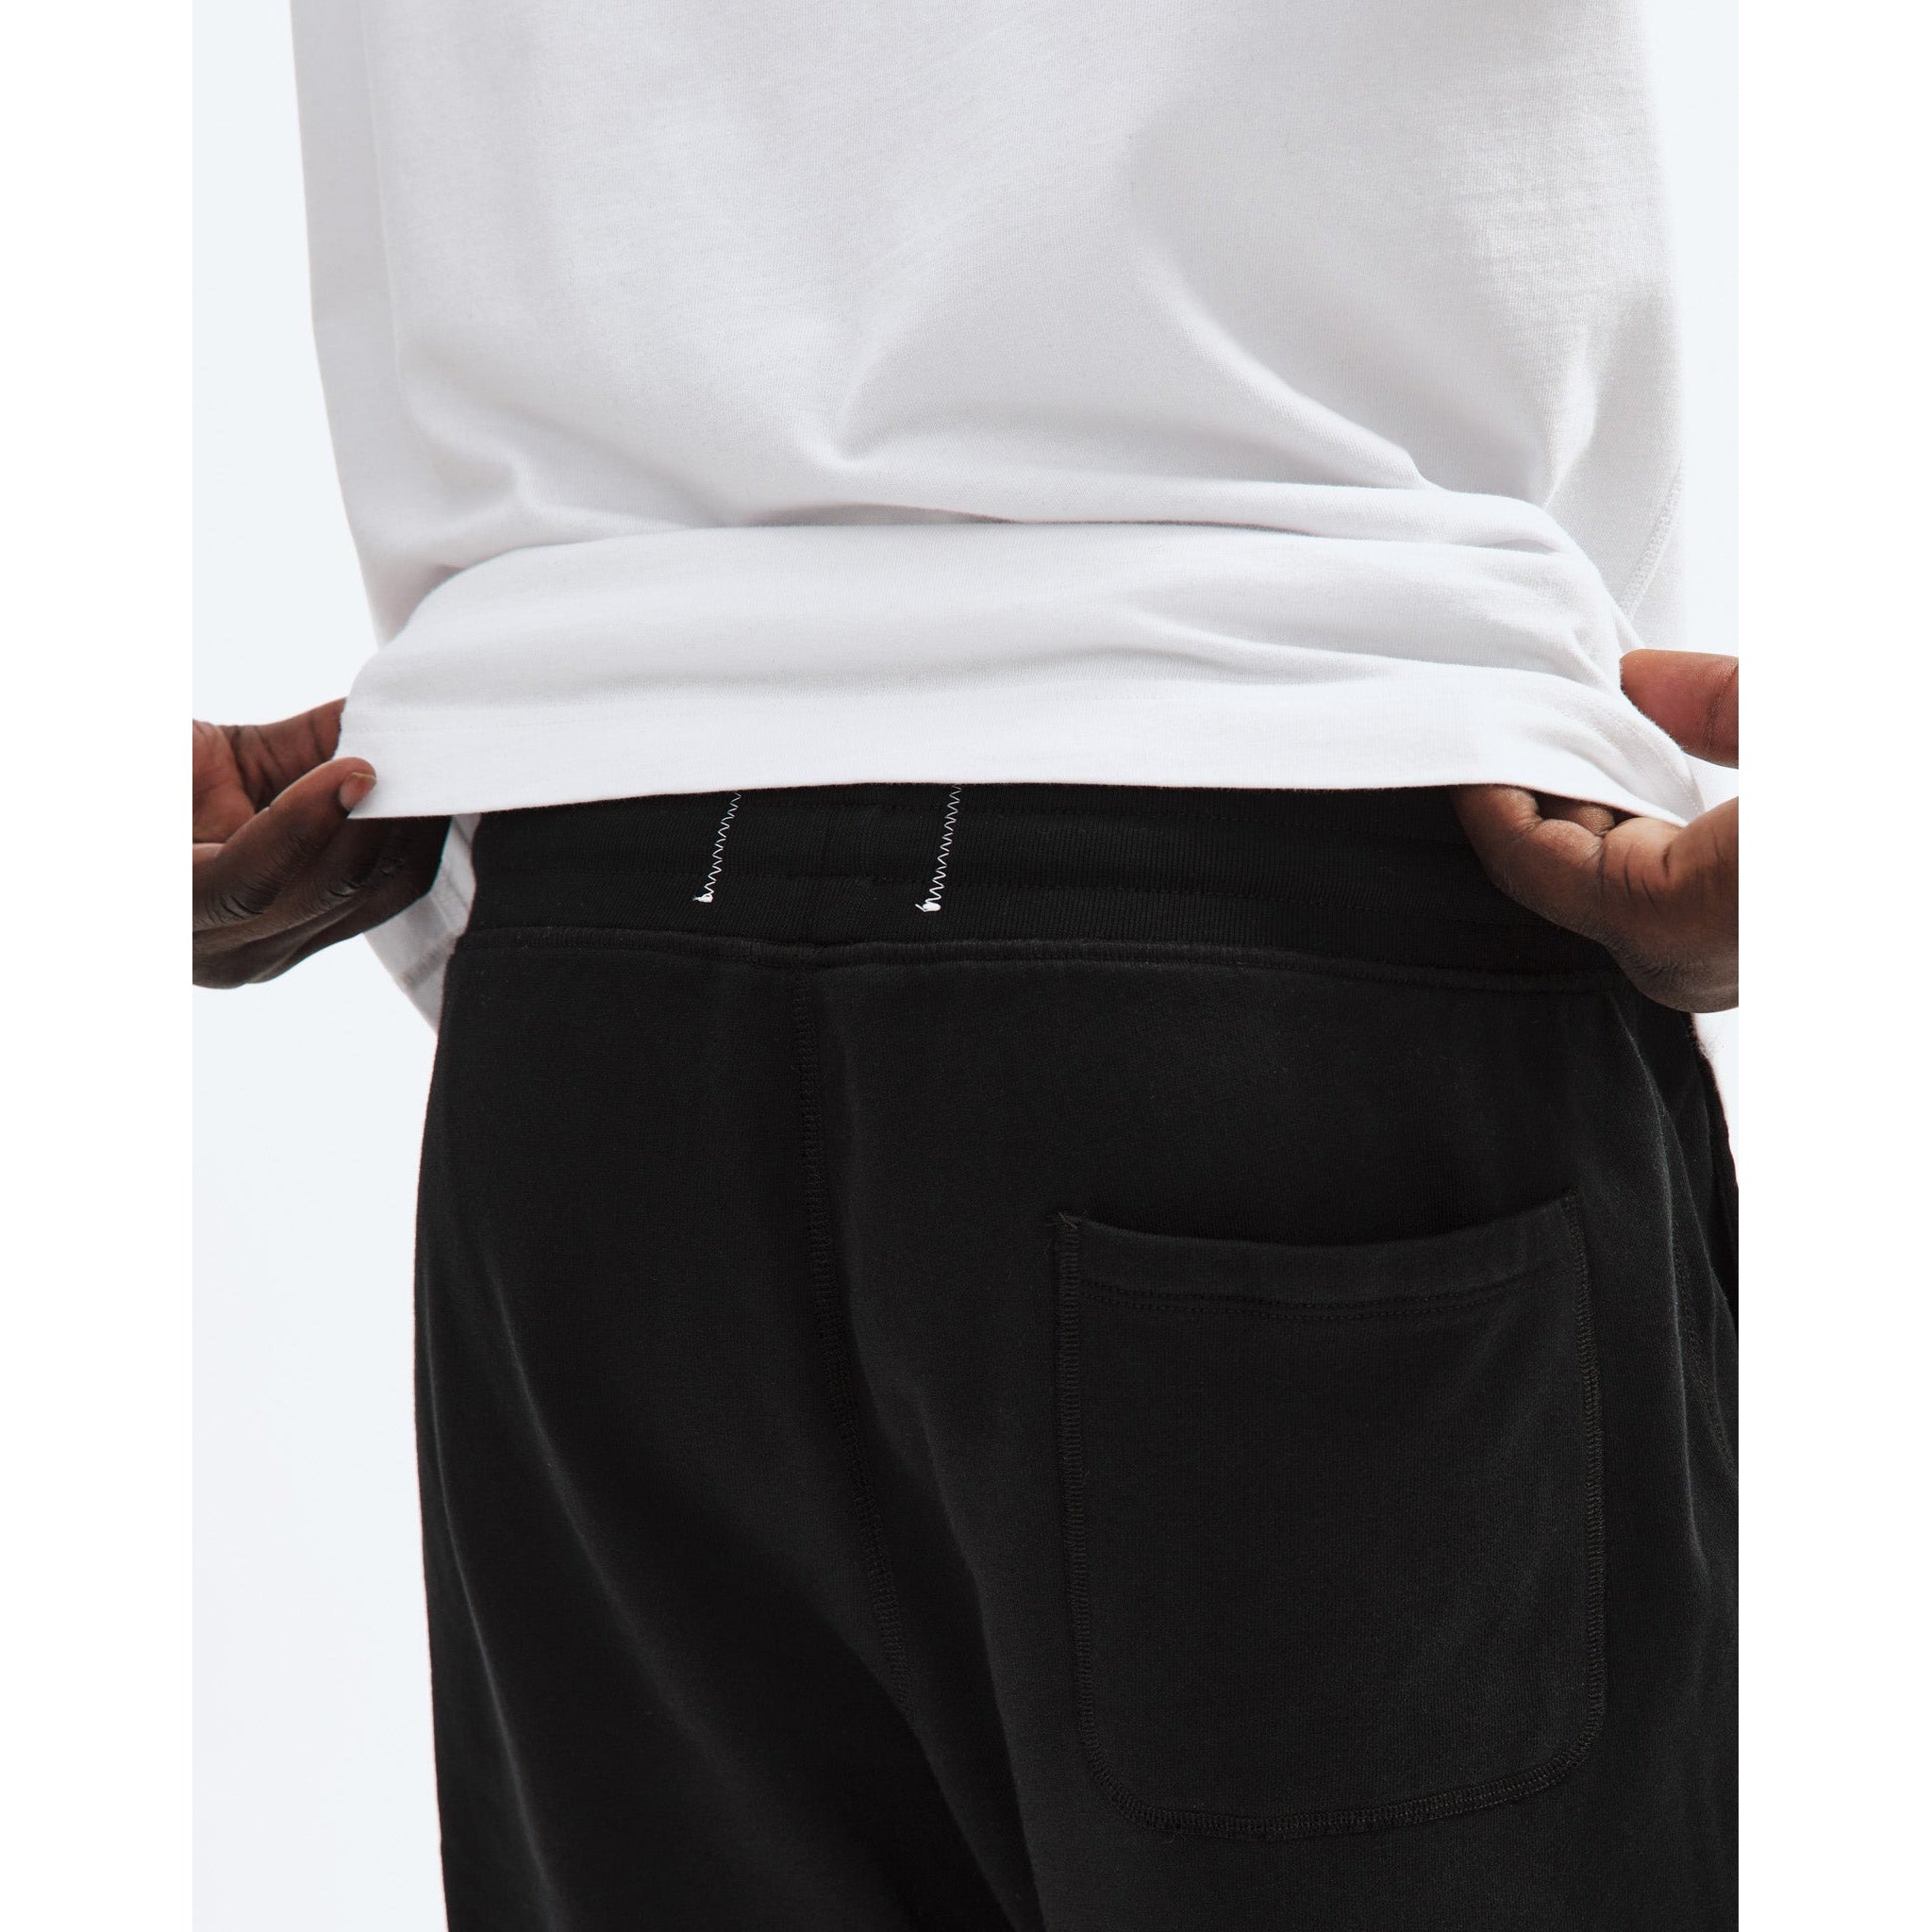 Reigning Champ Men Lightweight Terry Cuffed Sweatpant Black RC